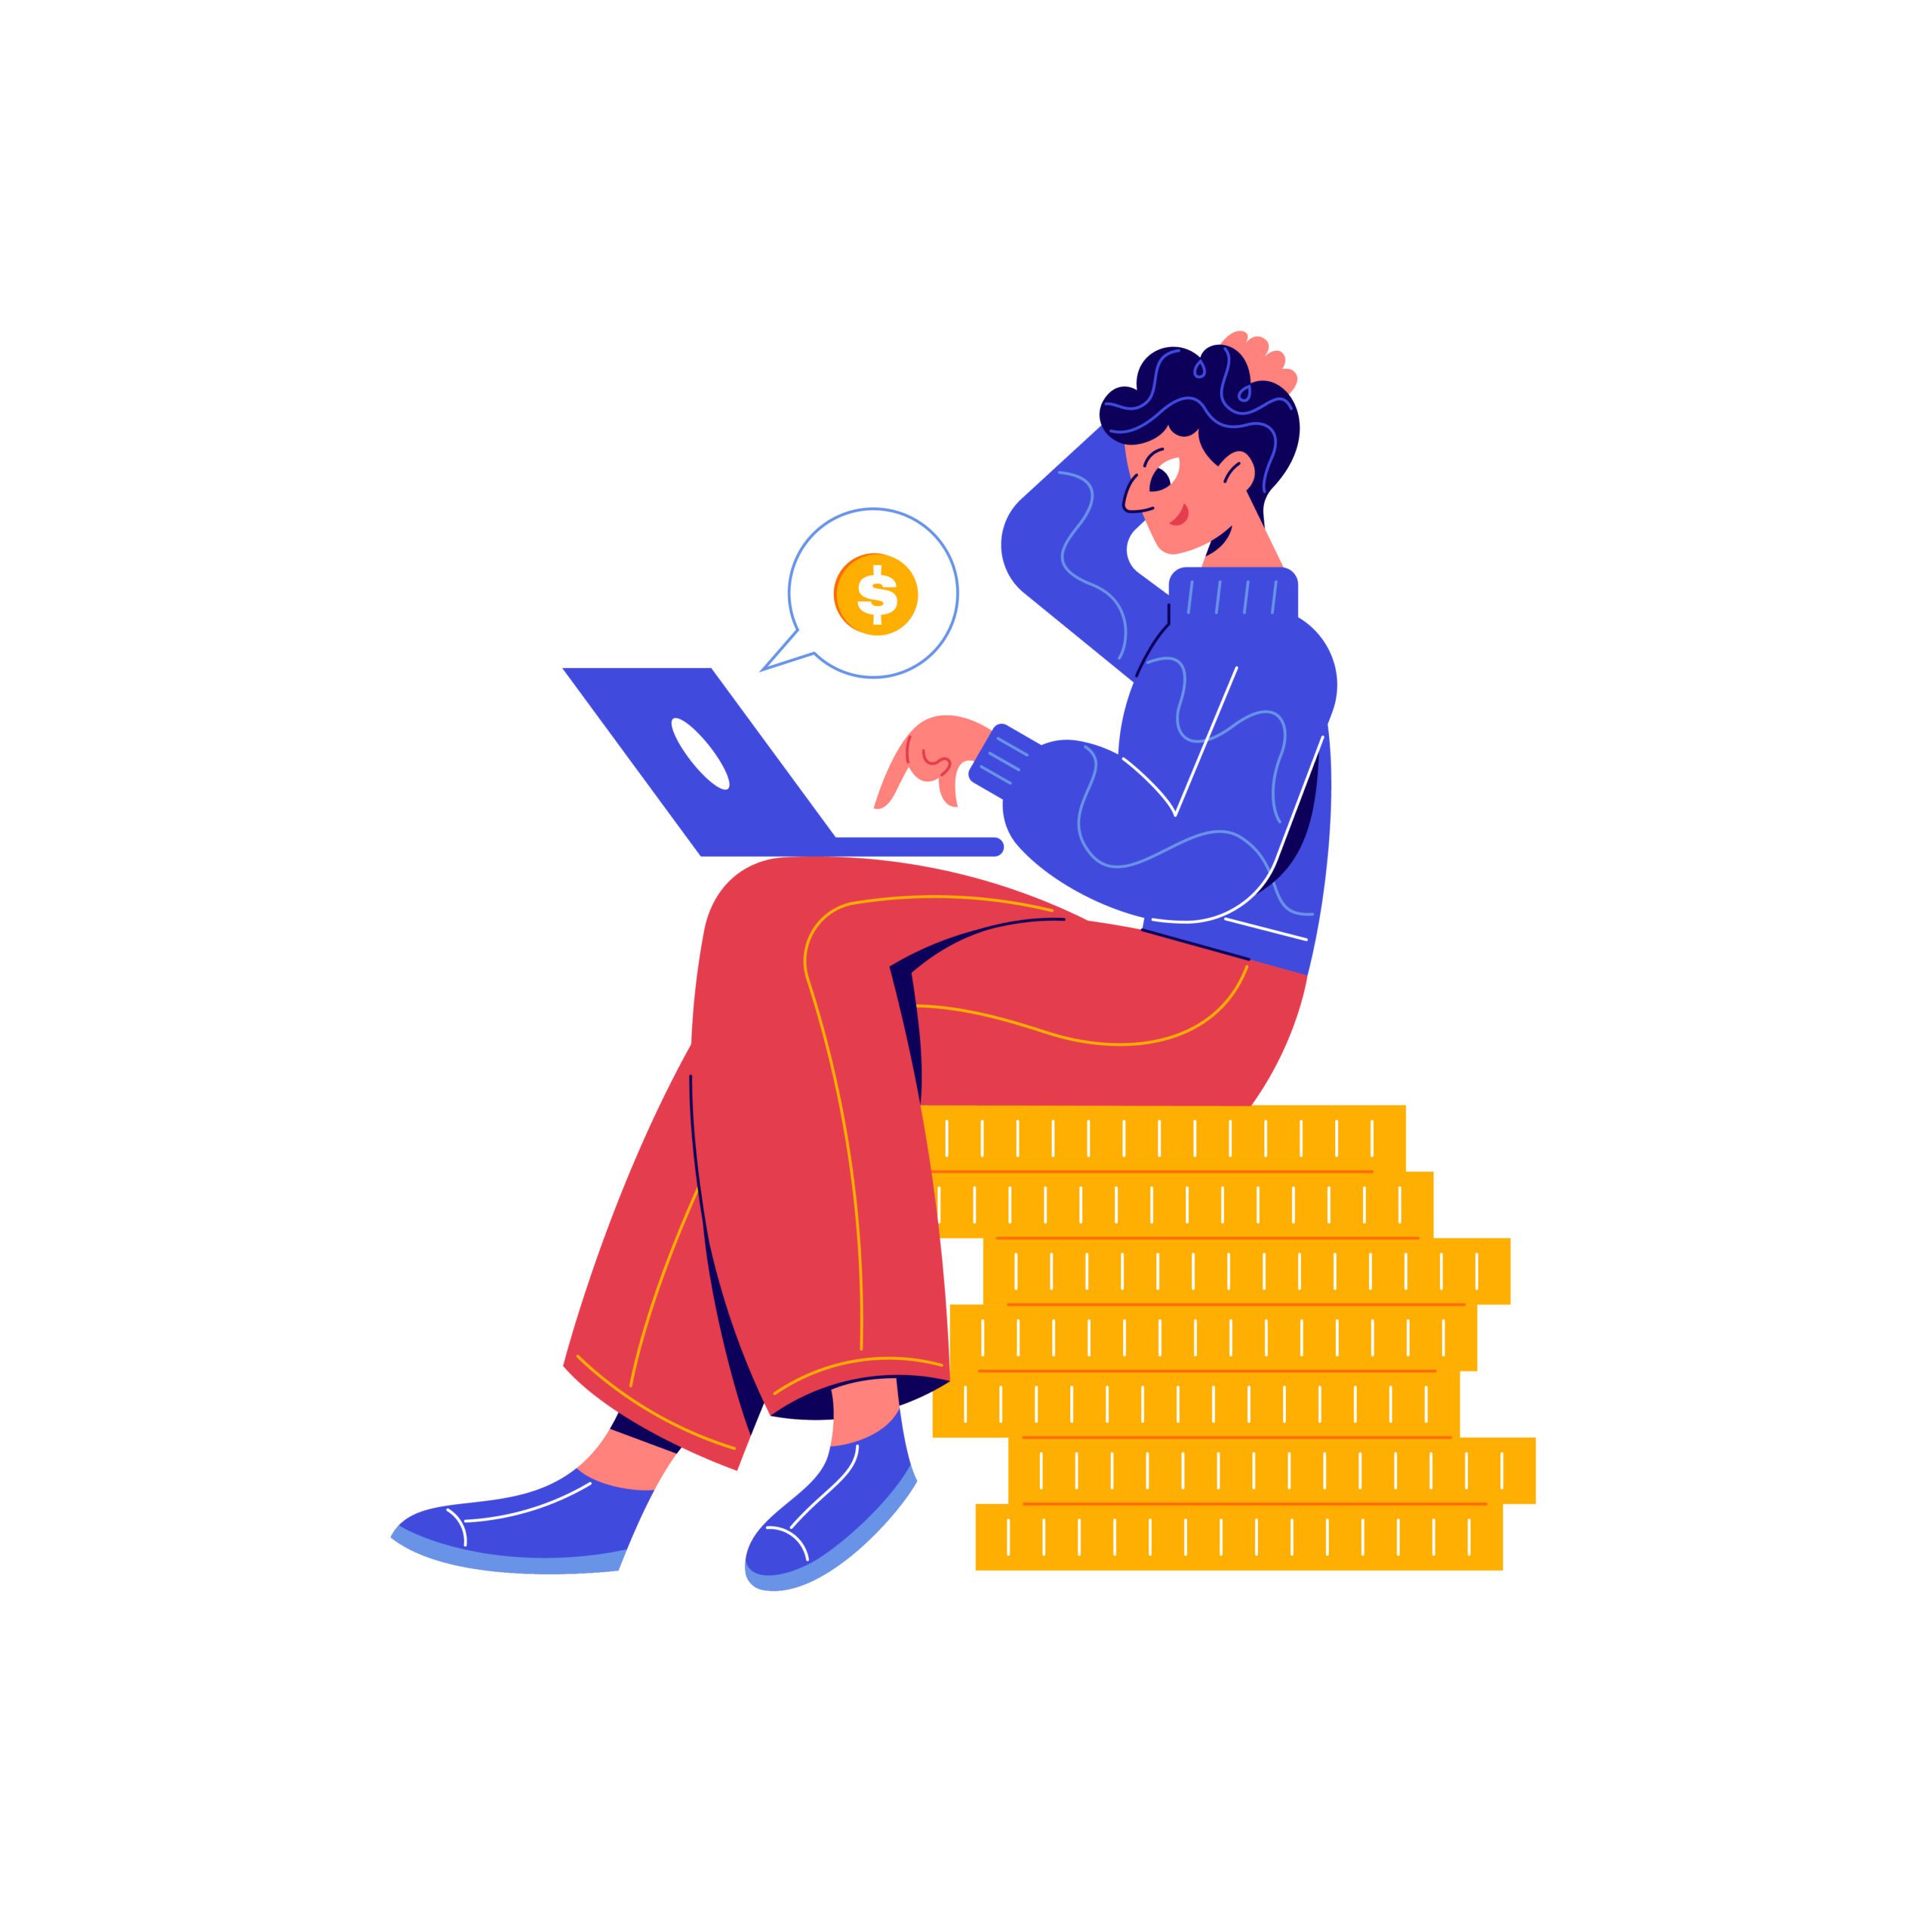 Crowdfunding composition with doodle character sitting on stack of coins with laptop vector illustration